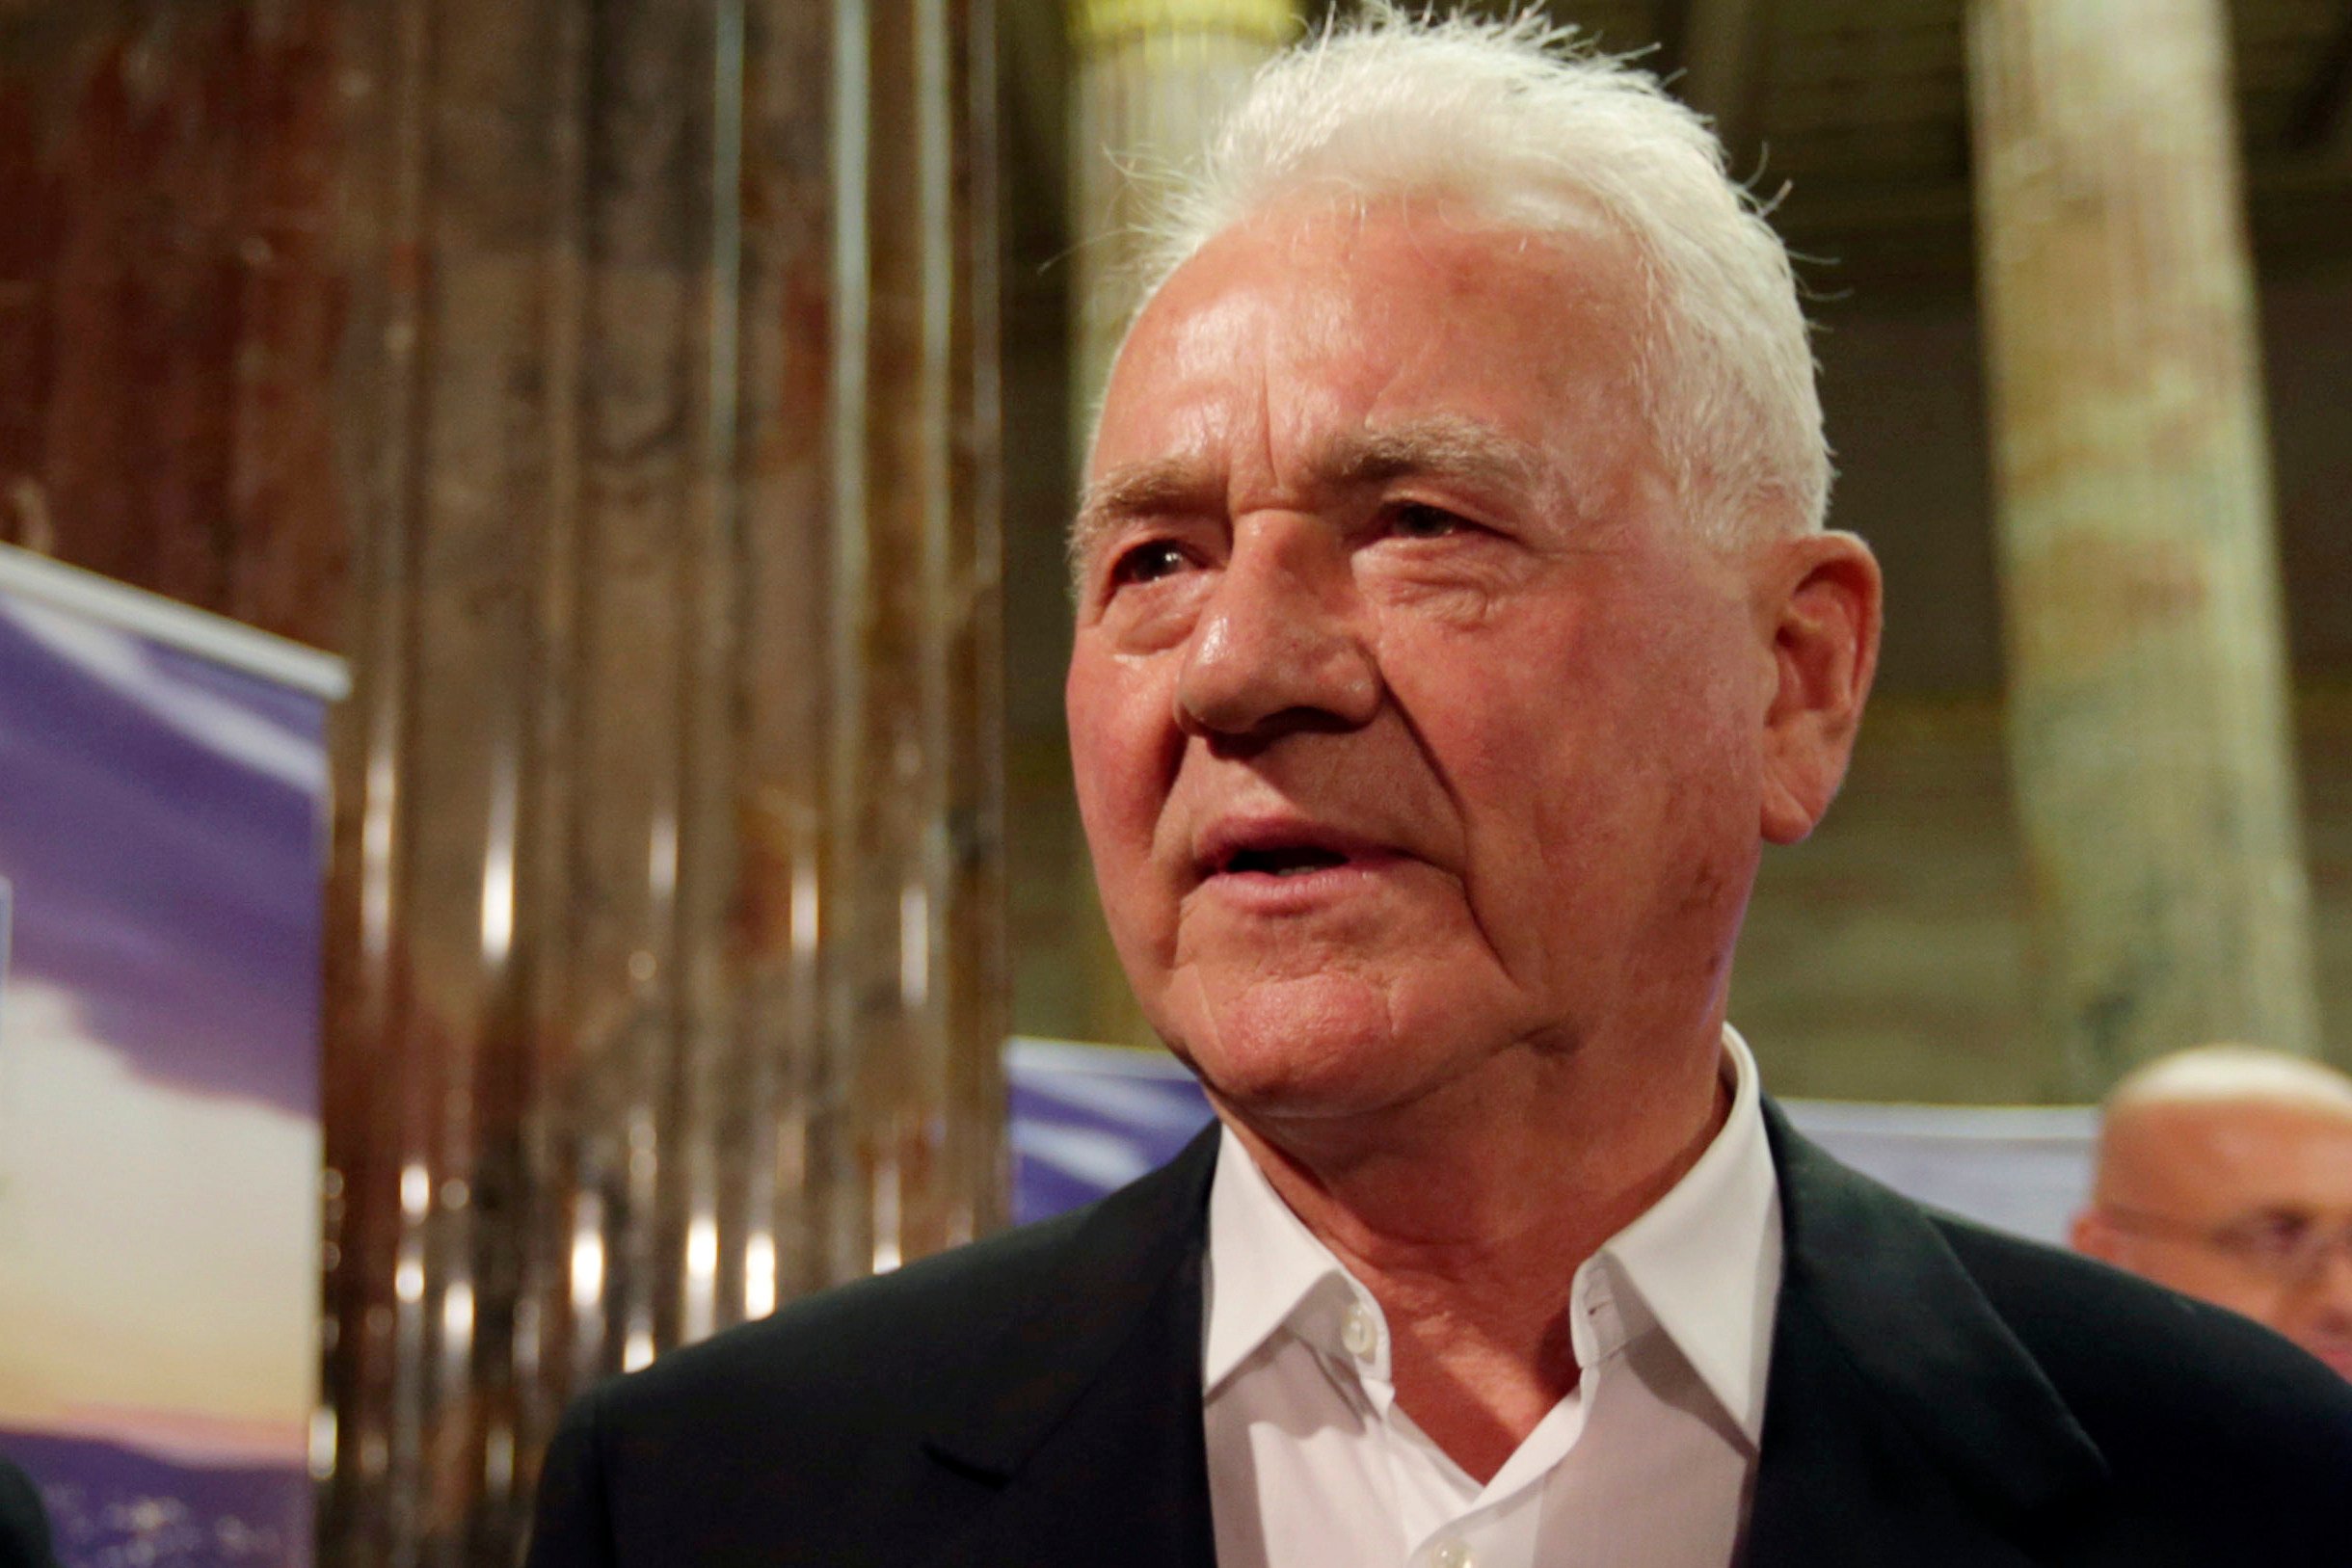 Austro-Canadian billionaire Frank Stronach in 2013. Canadian police have charged Stronach with sexual assault dating back to the 1980s. File photo: AP